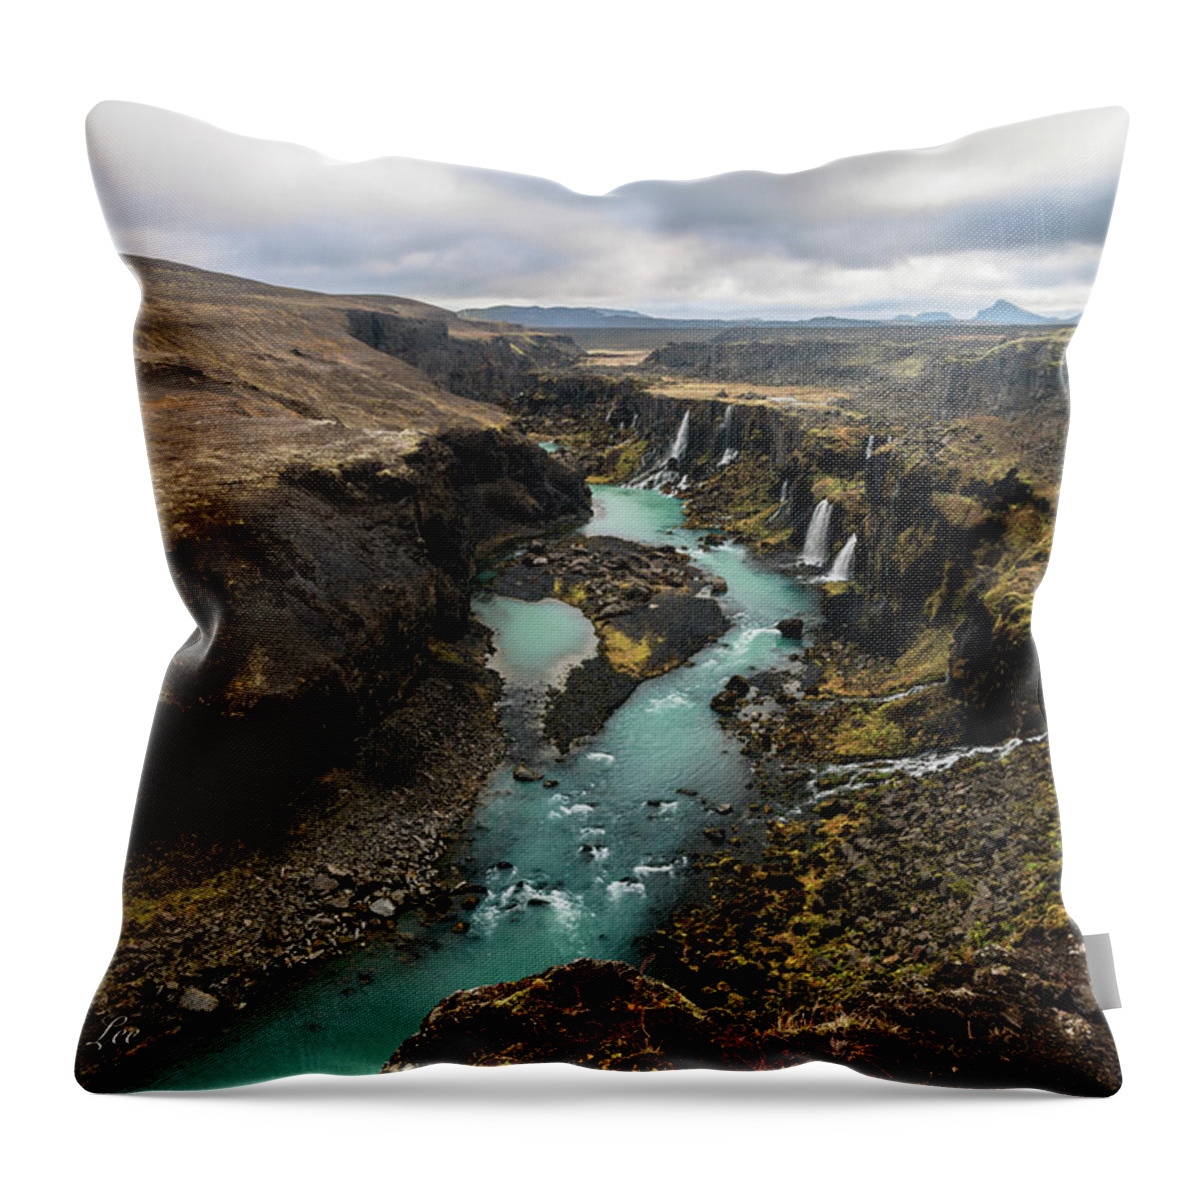 Iceland Throw Pillow featuring the photograph Ancient River by David Lee